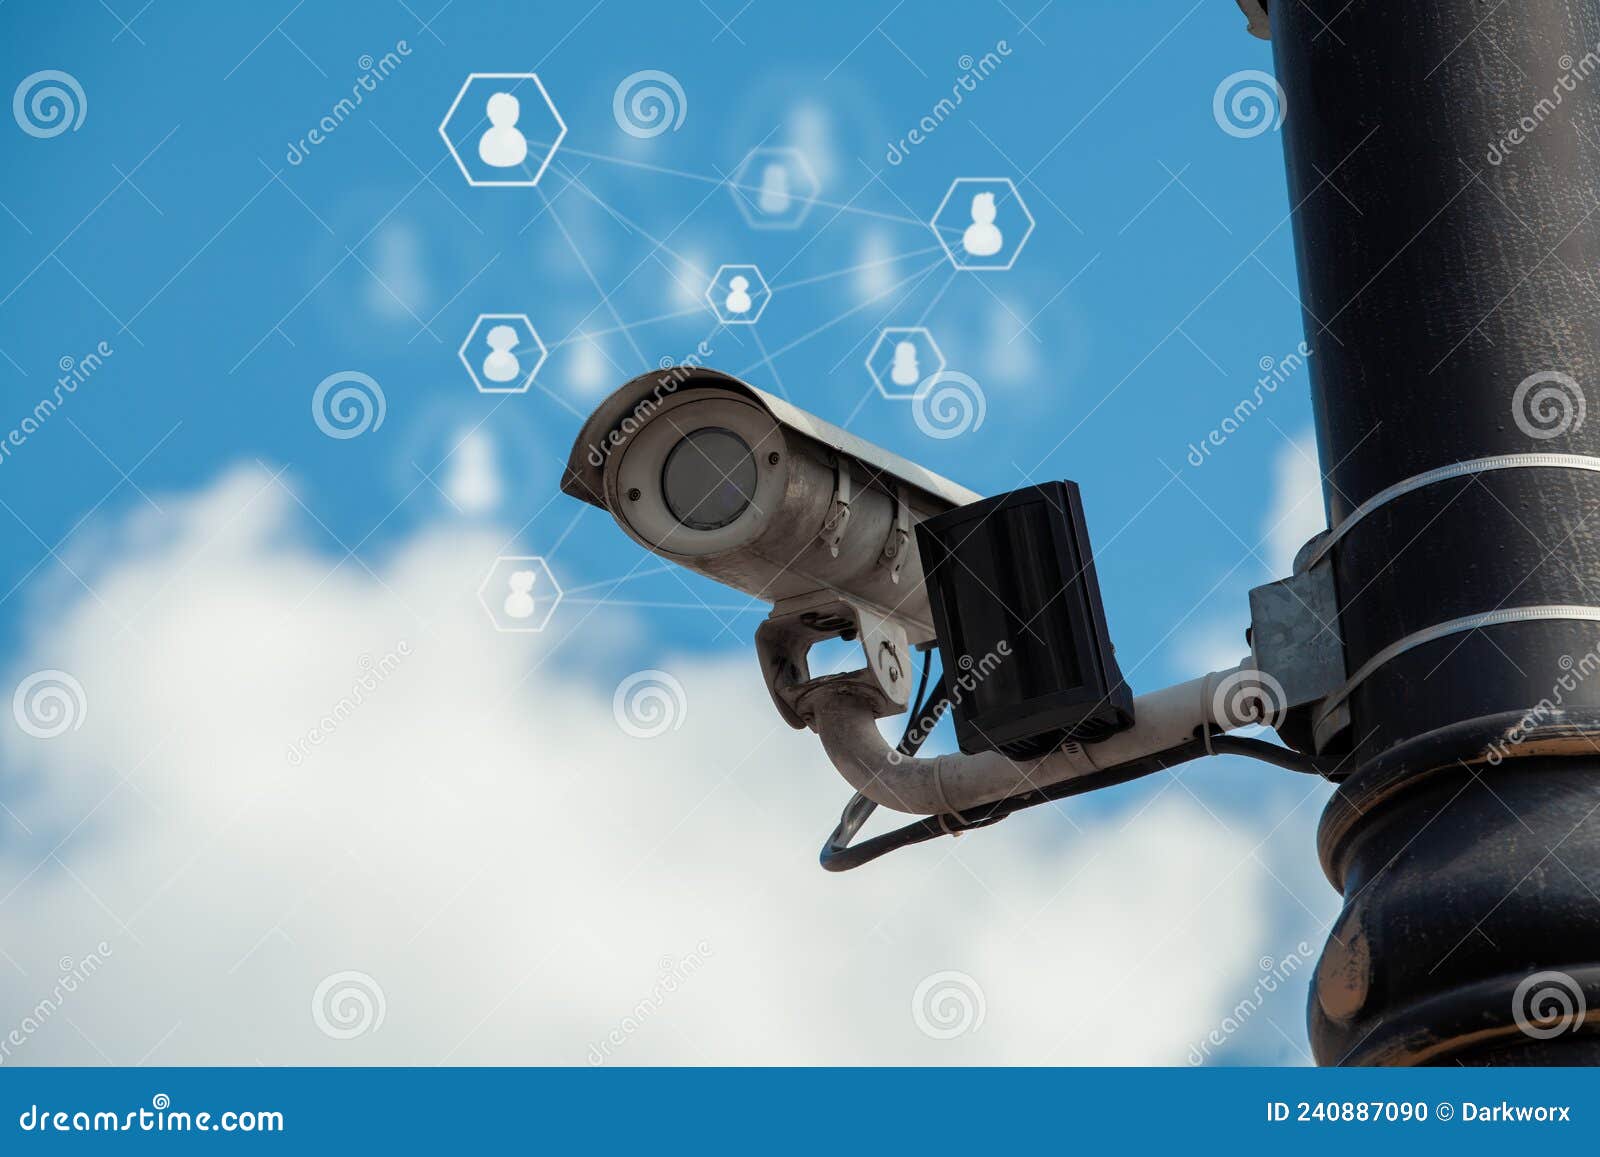 ccd surveillance camera mounted on a pole in the street